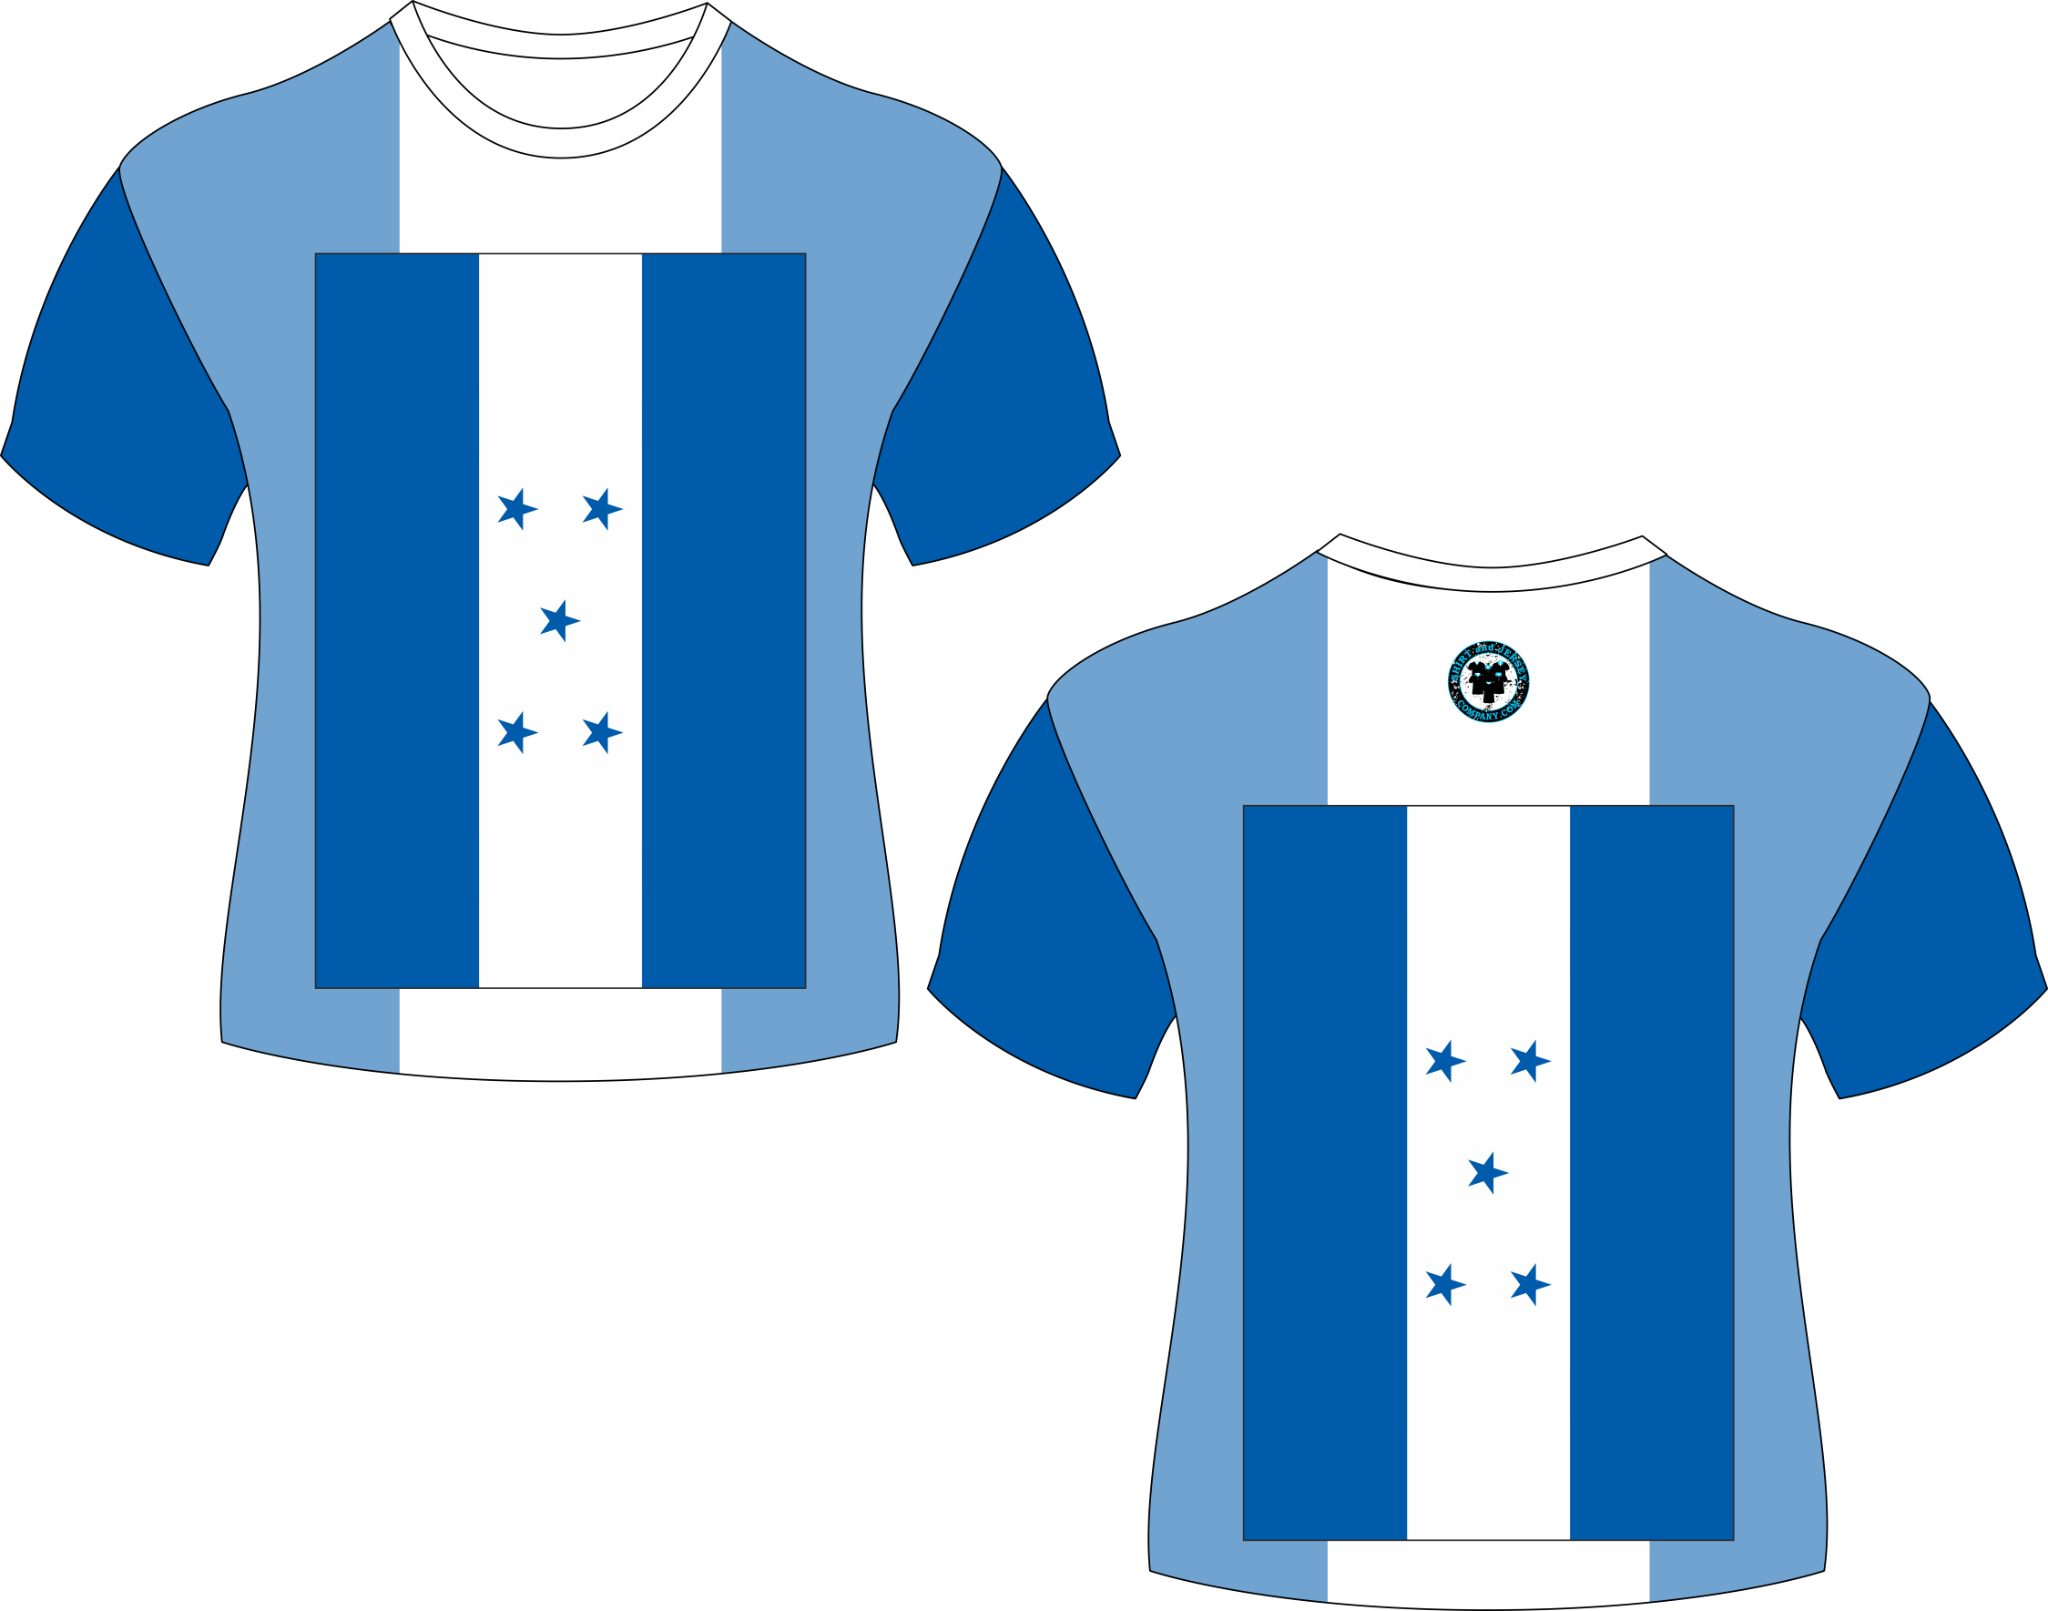 A Blue And White Shirt With White Stripes